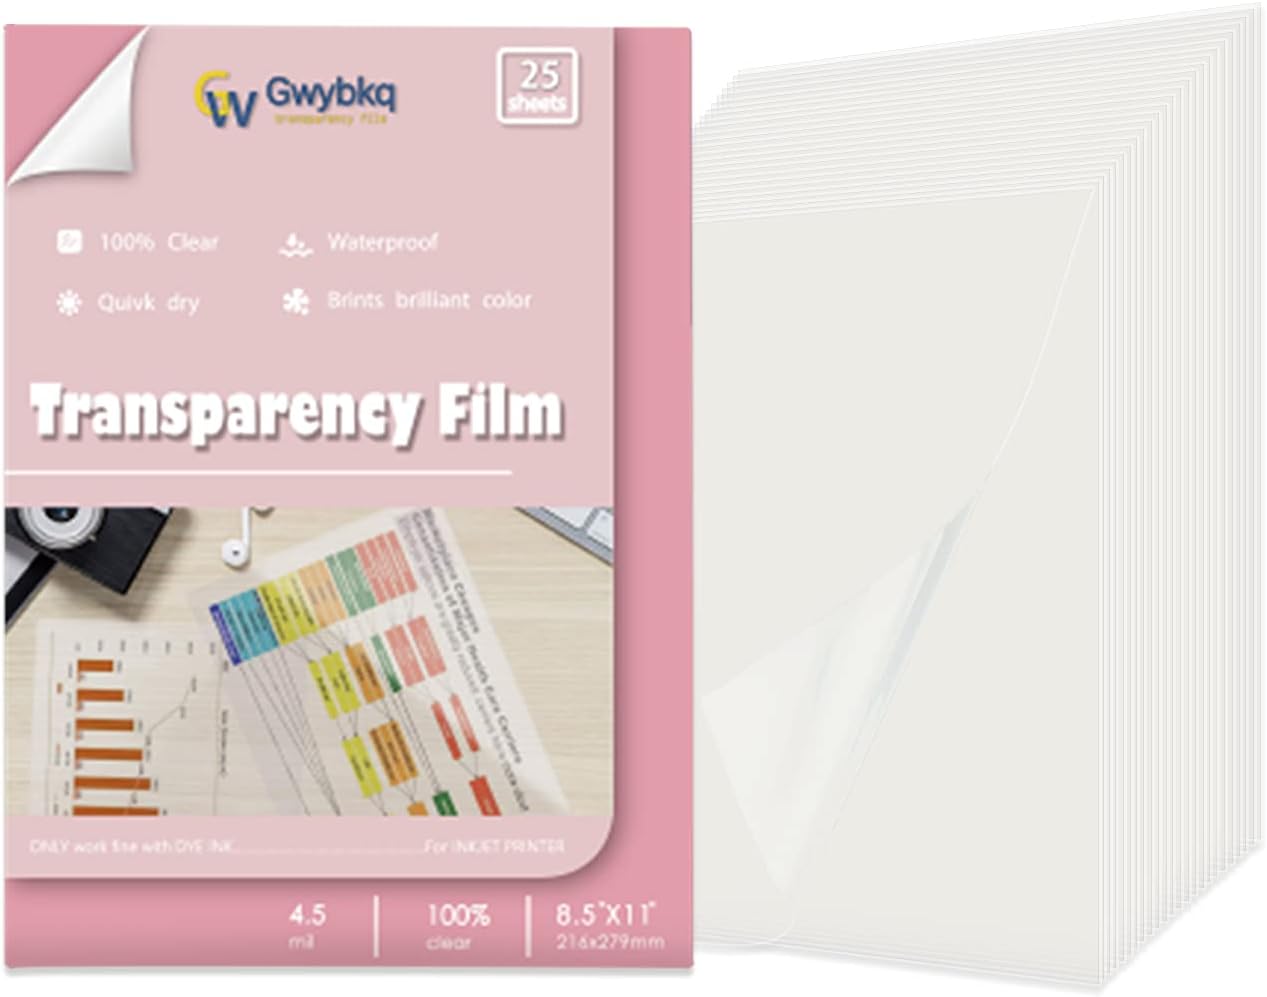 Transparency Film Paper Clear for Overhead Projector [...]